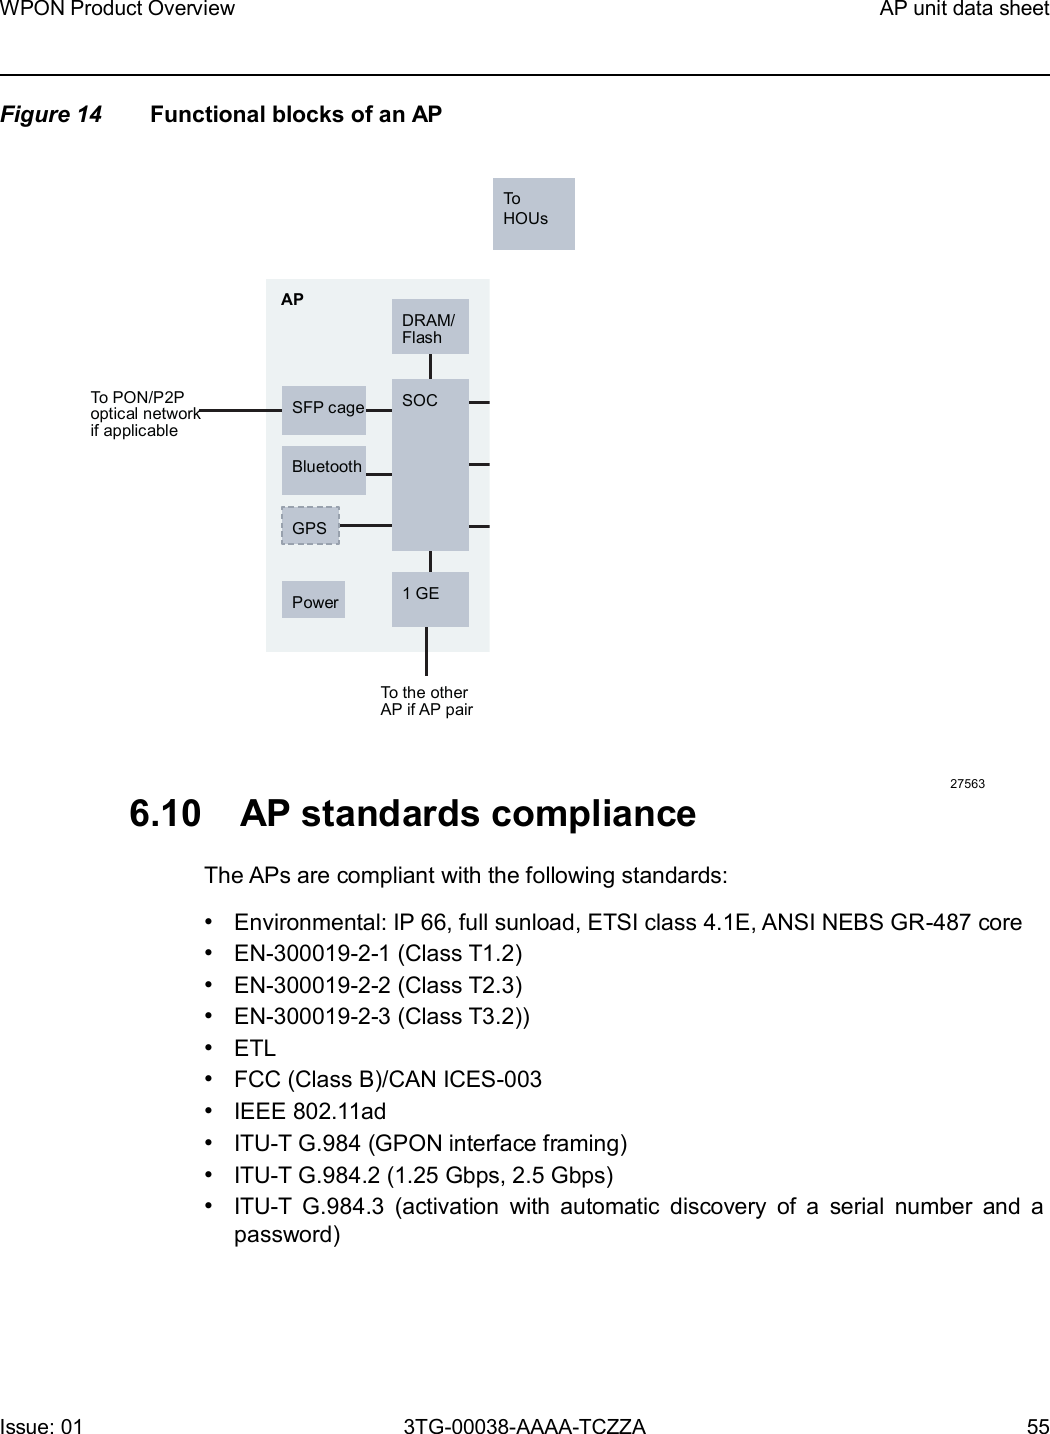 Page 55 of Nokia Bell 7577WPONAPED WPON User Manual WPON Product Overview